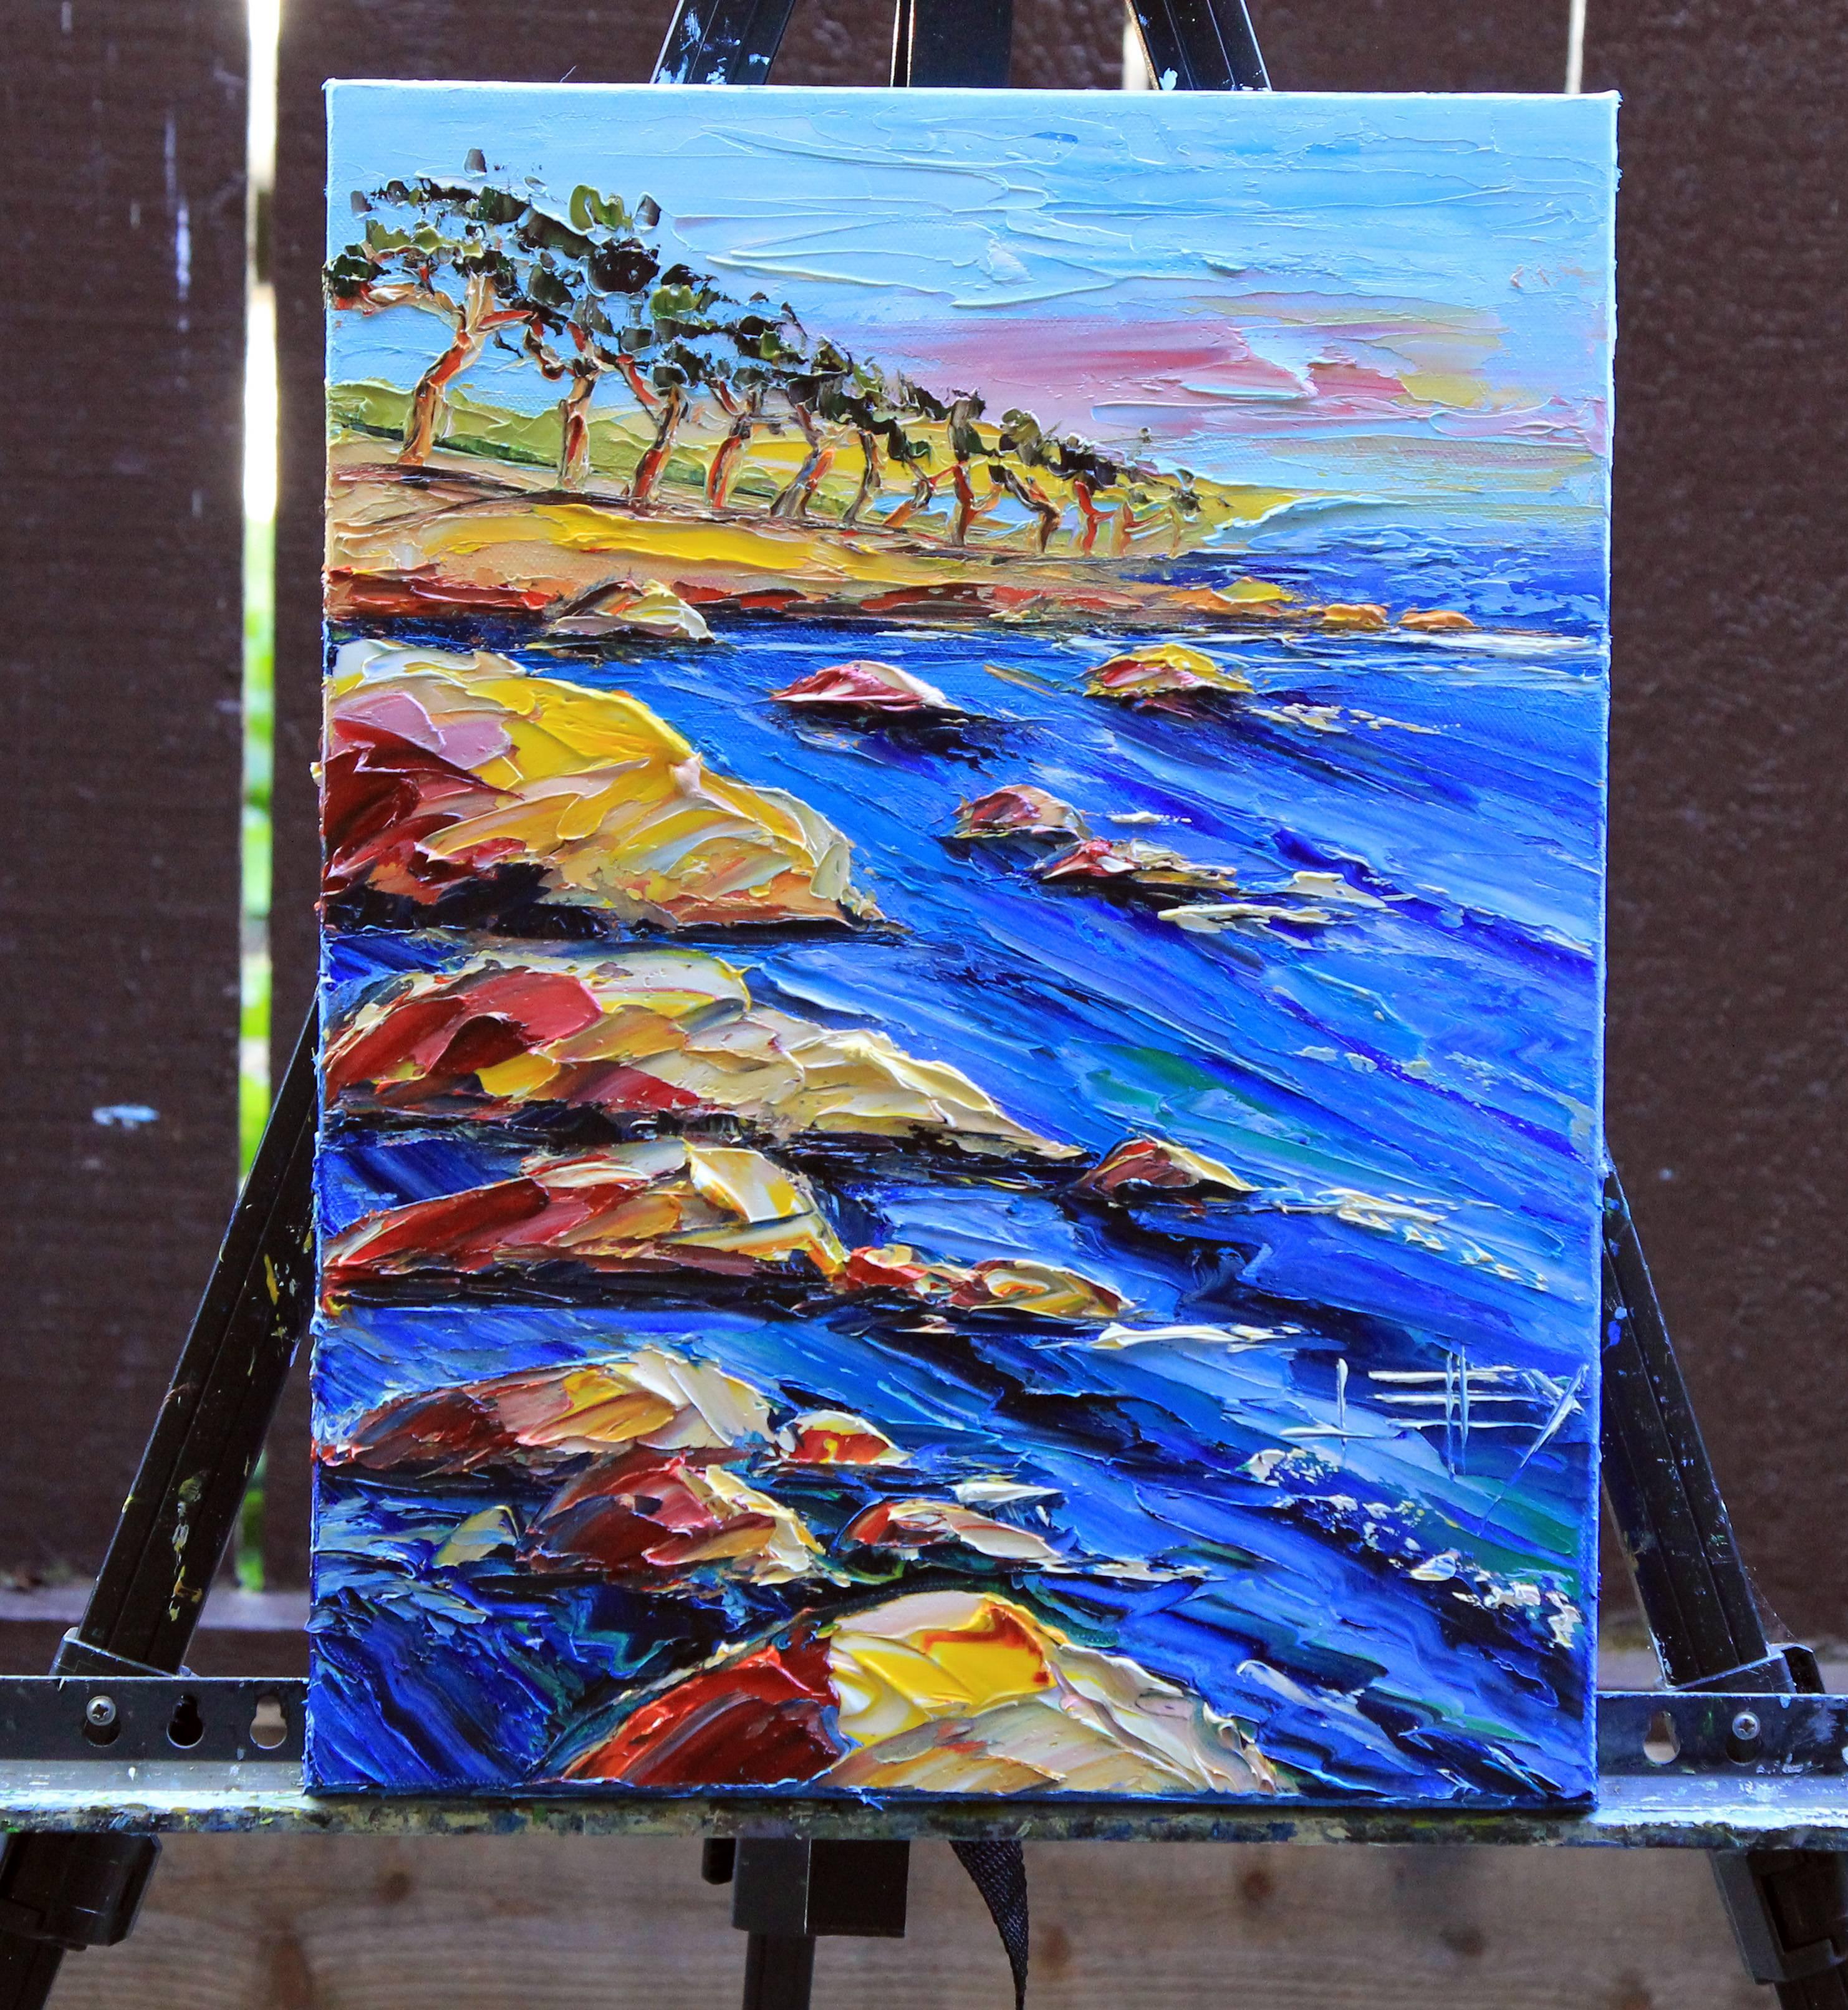 <p>Artist Comments<br>Monterey is my favorite hideaway in Northern California. I often sneak away from the bustle of the Silicon Valley, over the Santa Cruz mountains, to the idyllic and captivating cliffs of Monterey, Carmel, and Big Sur. I paint